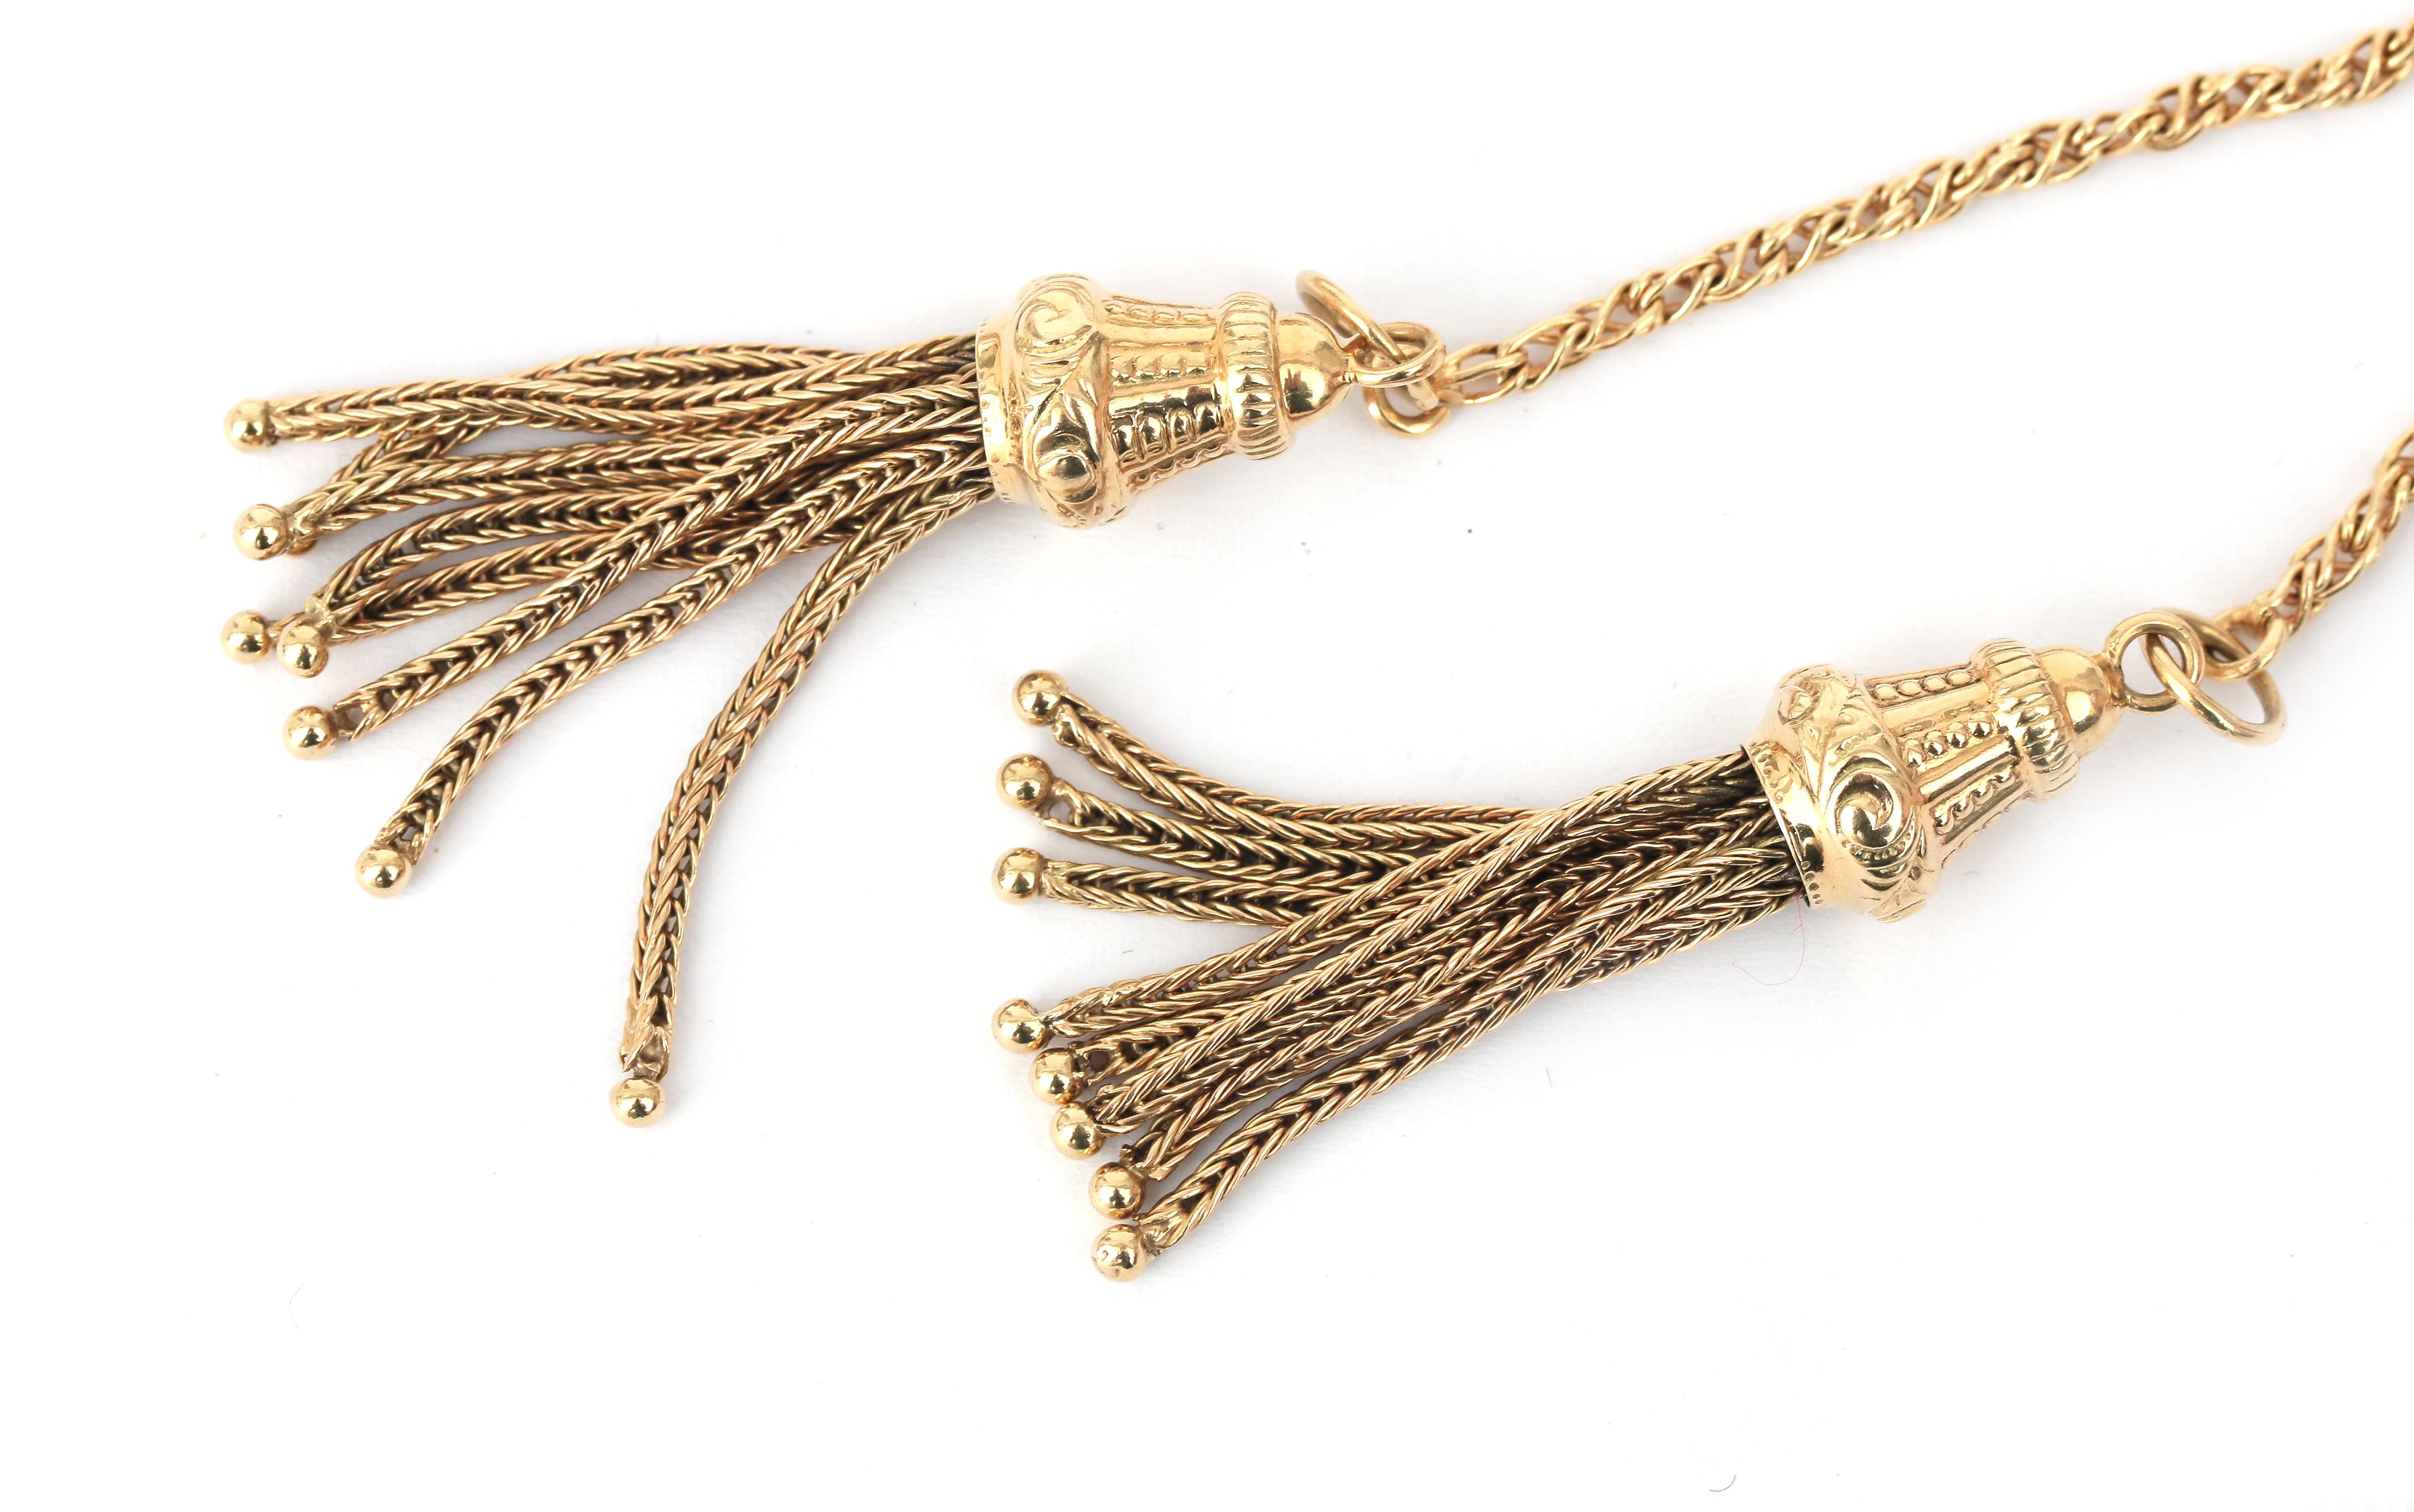 A 14 karat gold rope necklace with tassels - Image 4 of 4